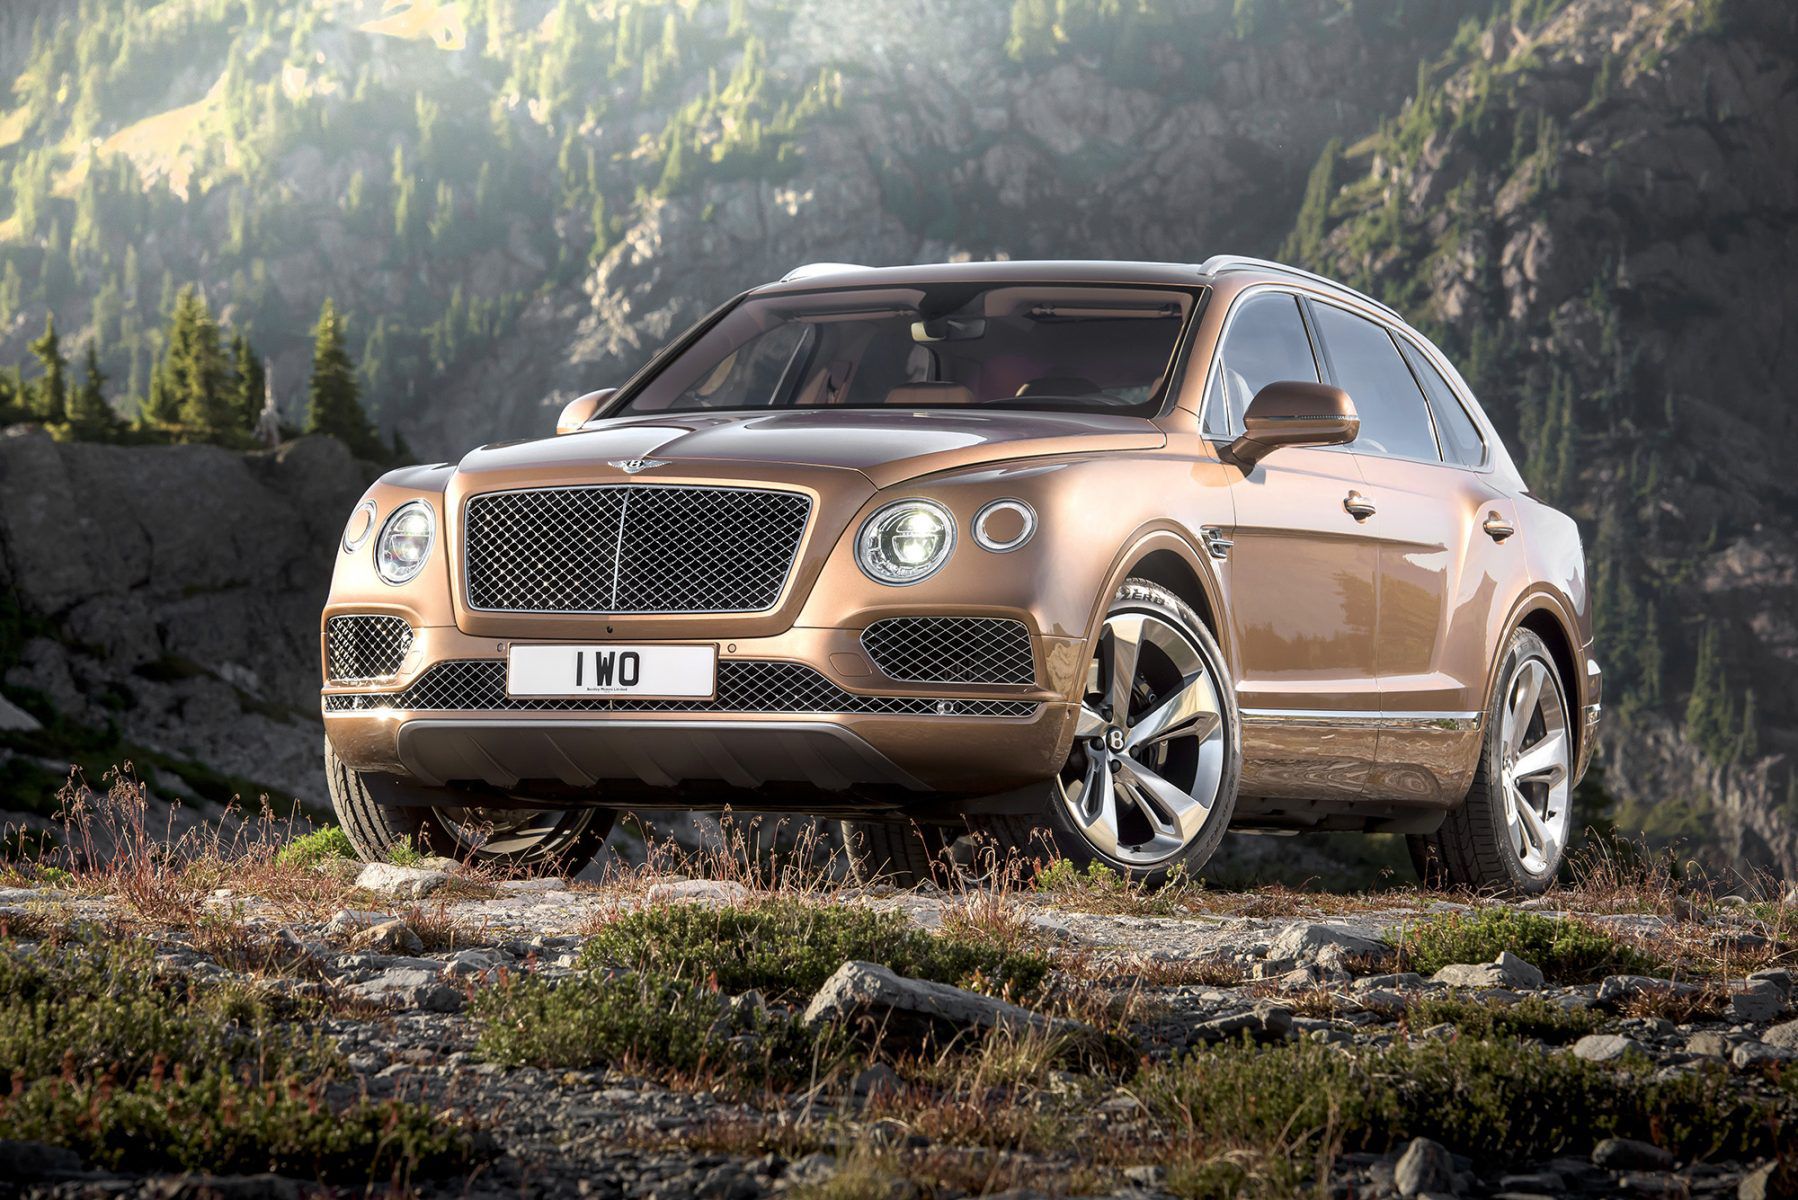 Gold Bentley parked on grass